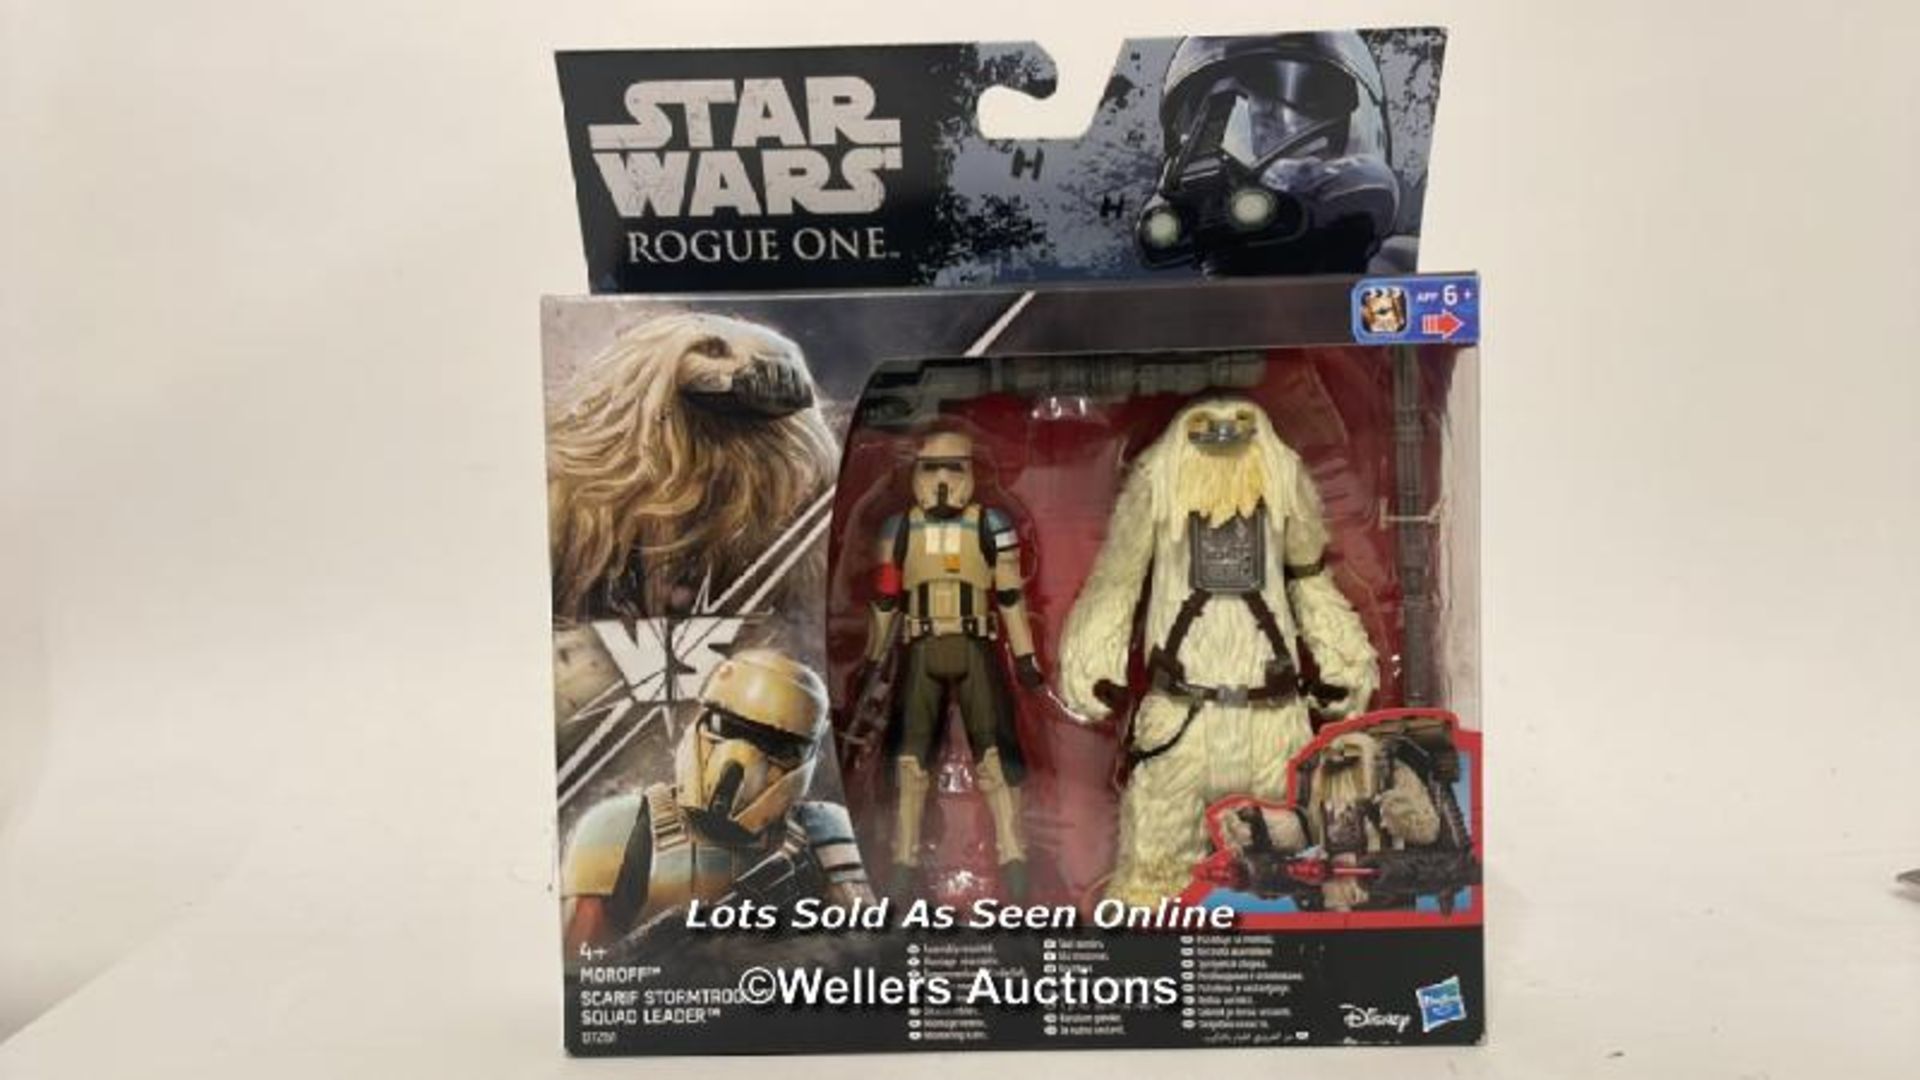 New Hasbro Disney era Star Wars toys including Imperial Speeder, First Order Snowtrooper with Snap - Image 5 of 7